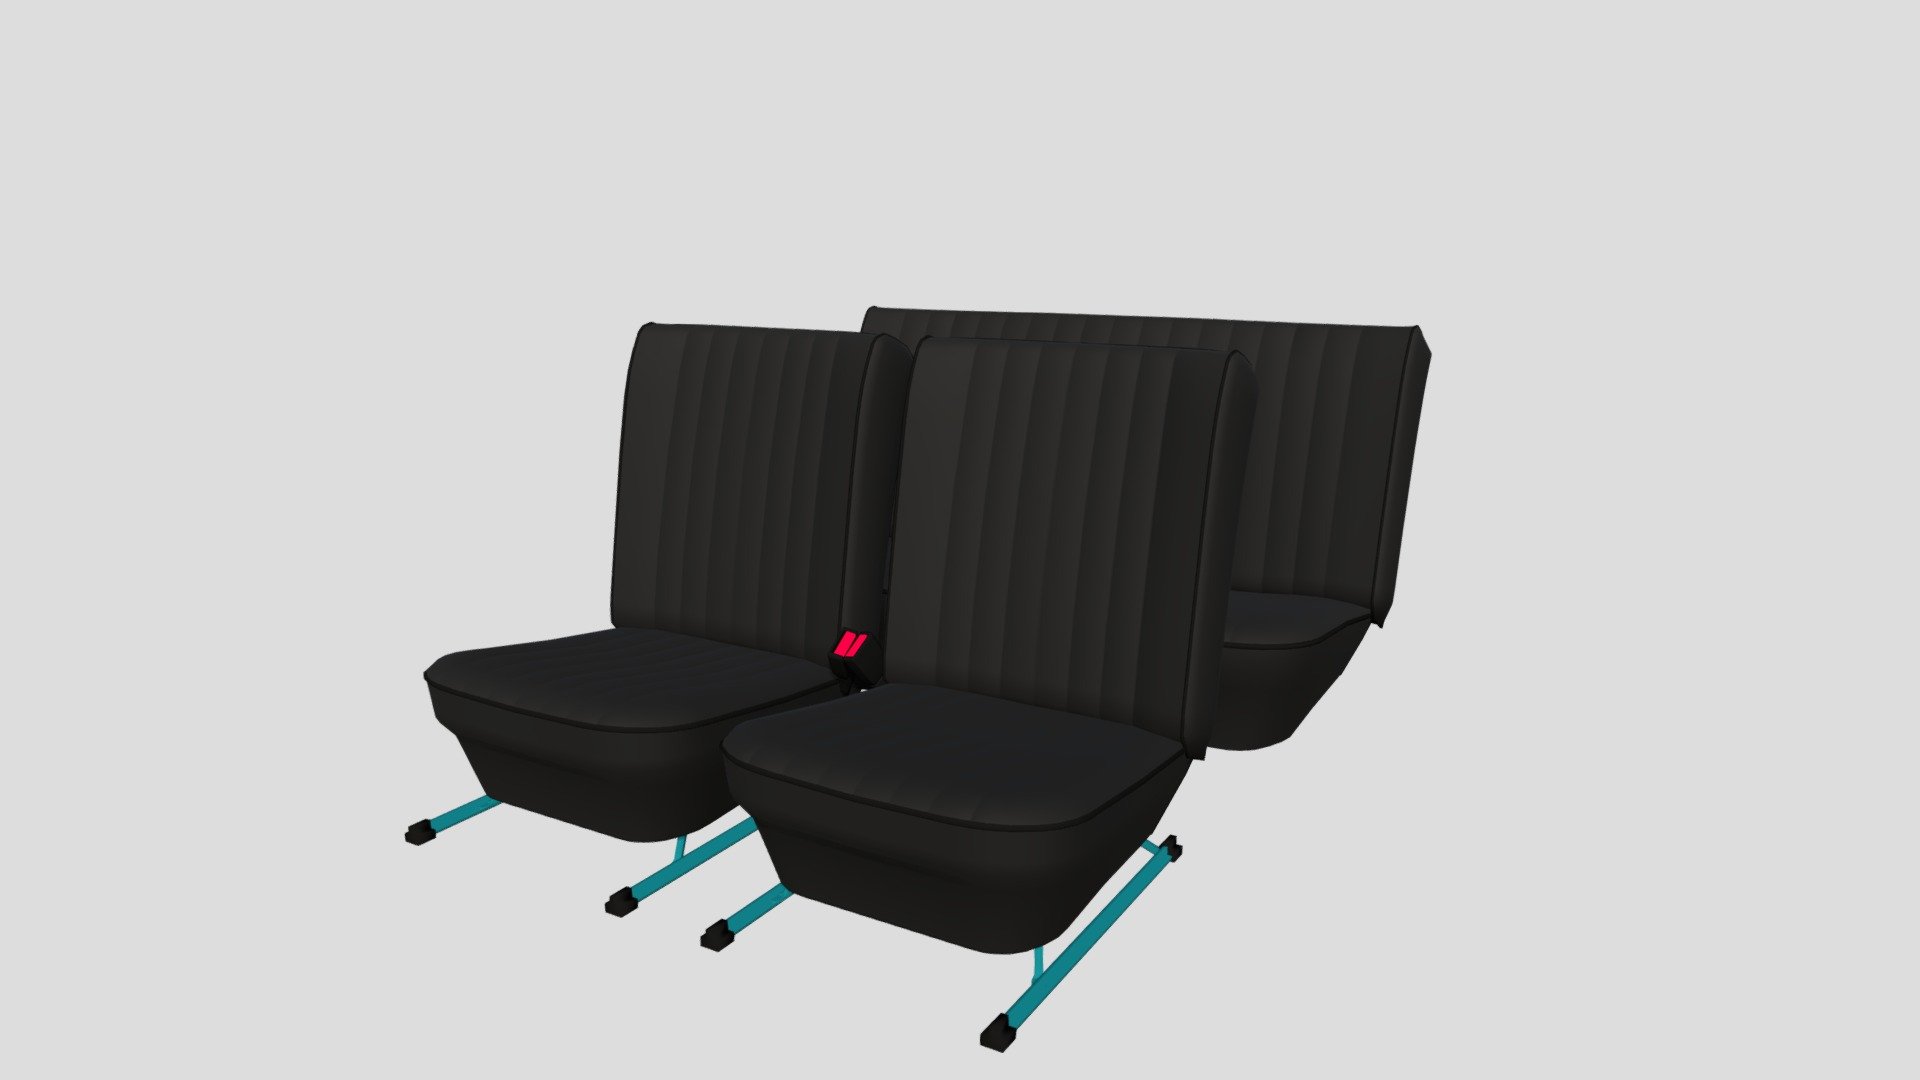 Generic Car Seats 3d model rendered with Cycles in Blender, as per seen on attached images.

File formats:
-.blend, rendered with cycles, as seen in the images;
-.obj, with materials applied;
-.dae, with materials applied;
-.fbx, with materials applied;
-.stl;

Files come named appropriately and split by file format.

3D Software:
The 3D model was originally created in Blender 2.8 and rendered with Cycles.

Materials and textures:
The models have materials applied in all formats, and are ready to import and render.

Preview scenes:
The preview images are rendered in Blender using its built-in render engine &lsquo;Cycles'.
Note that the blend files come directly with the rendering scene included and the render command will generate the exact result as seen in previews.
Scene elements are on a different layer from the actual model for easier manipulation of objects 3d model